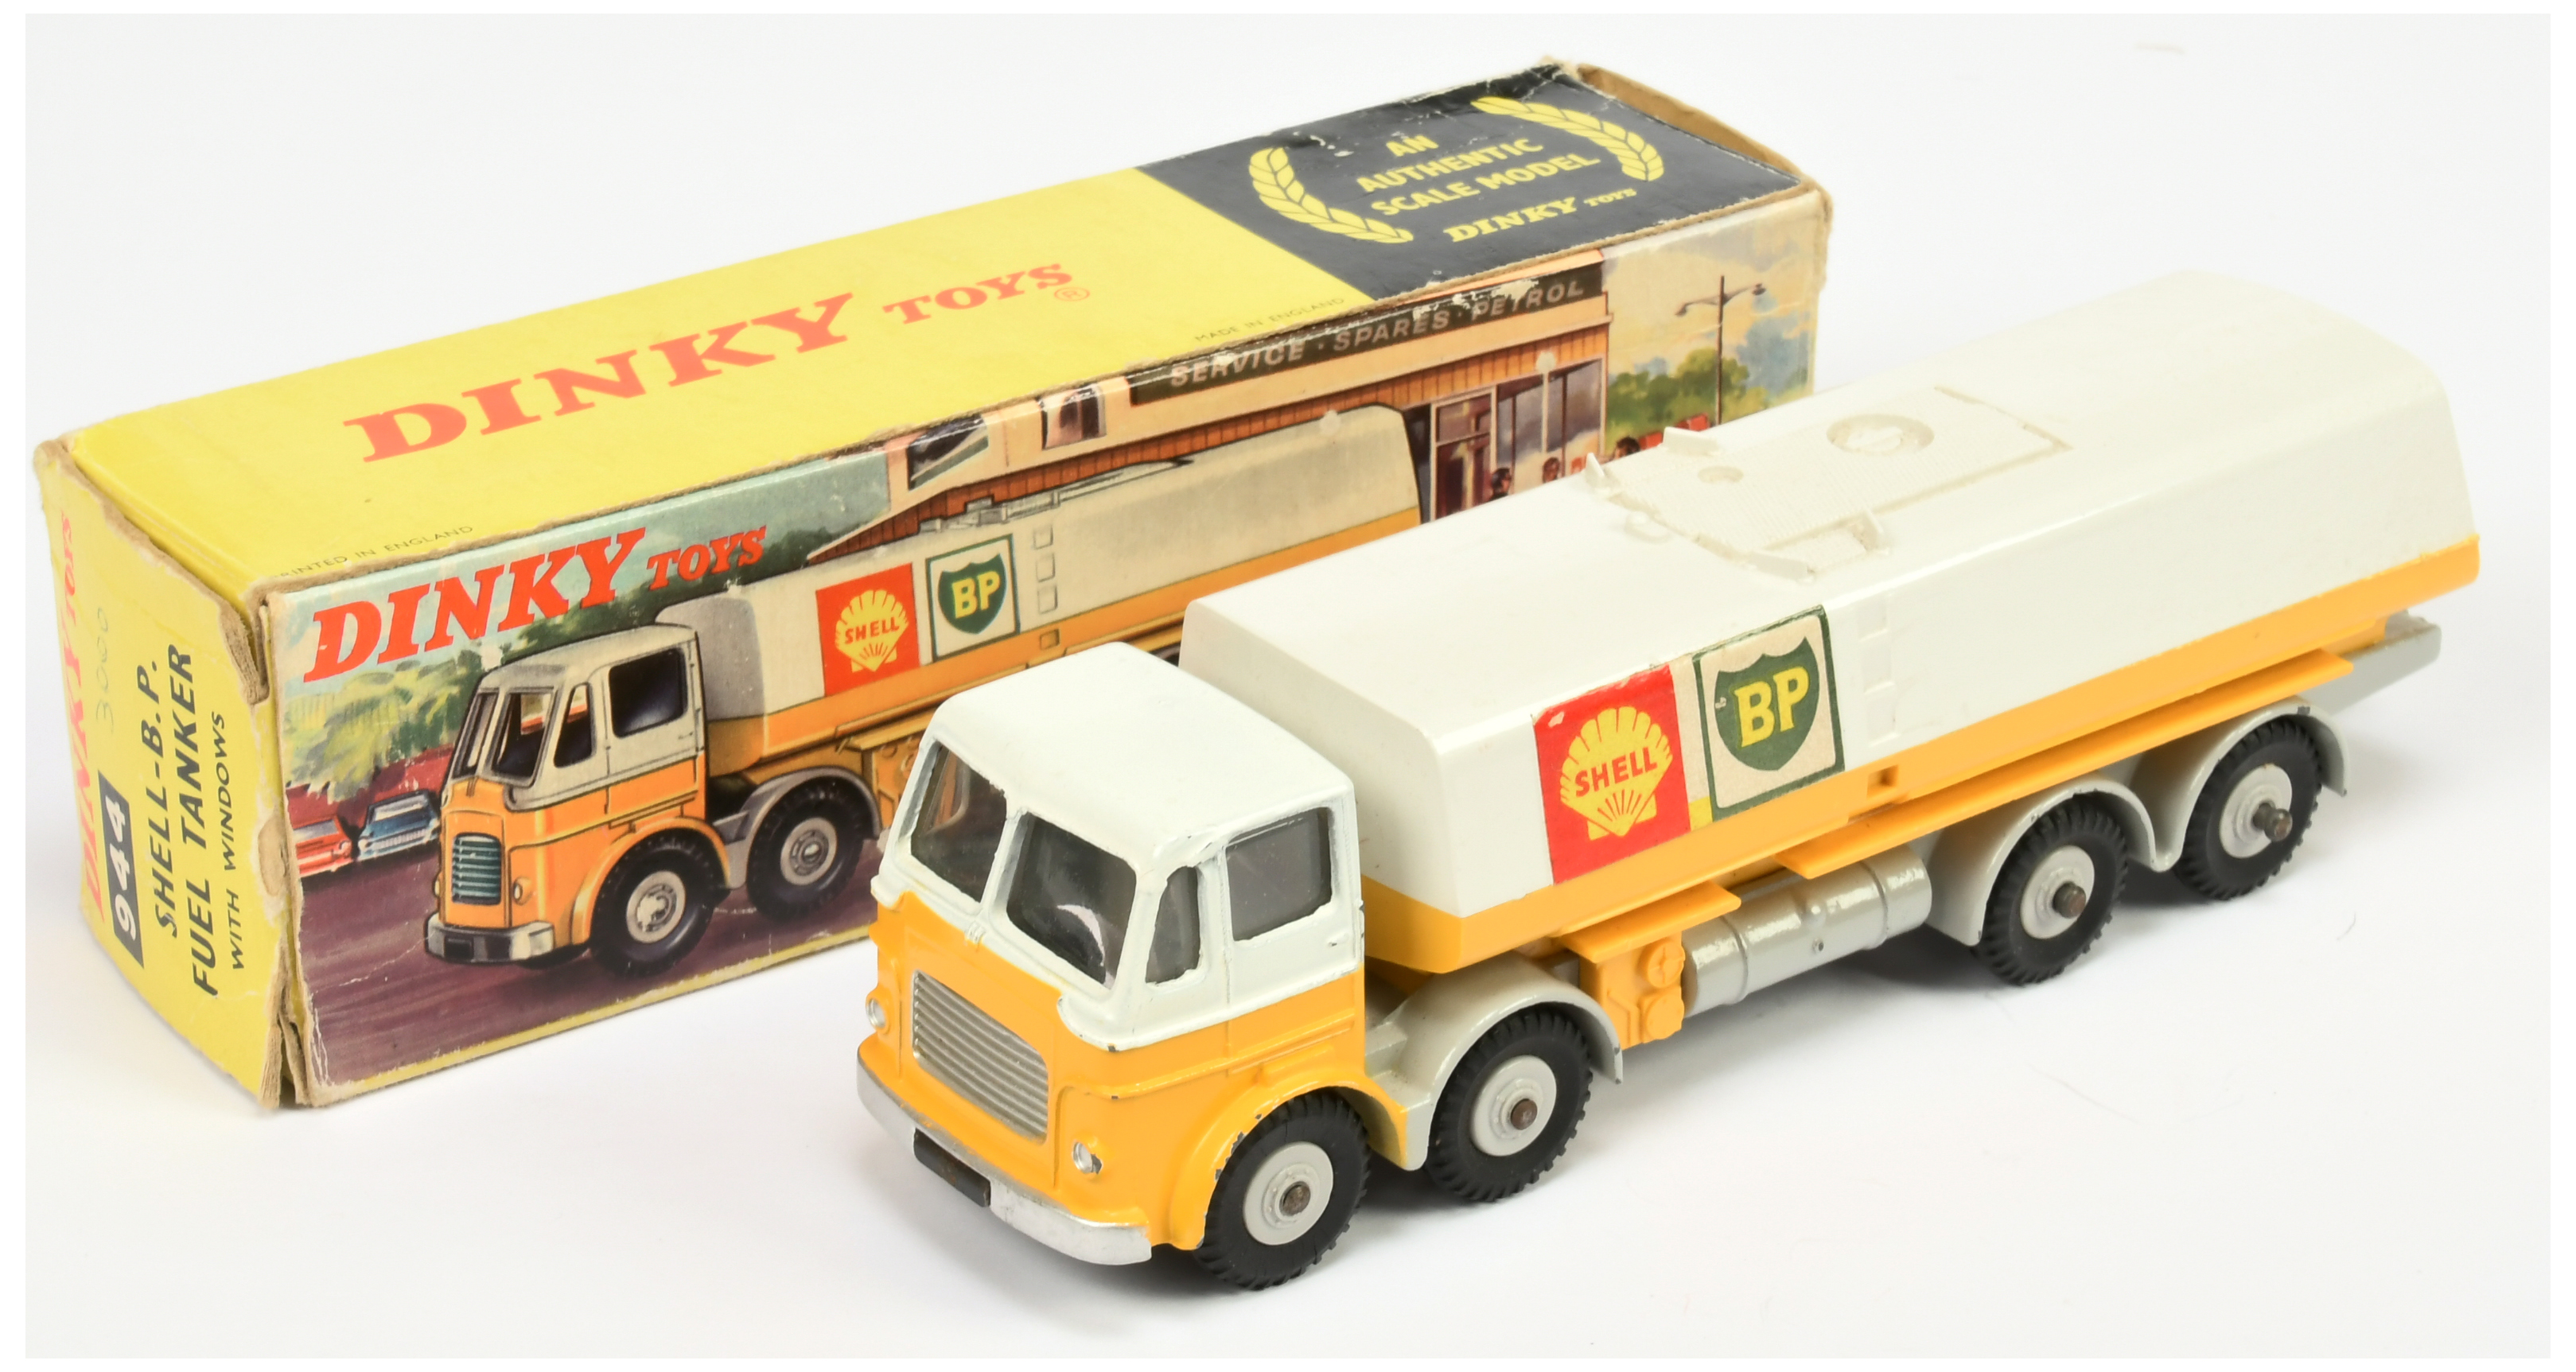 Dinky Toys 943 Leyland Octopus Tanker "Shell-BP" - yellow, white including Tanker, grey chassis a... - Image 3 of 4